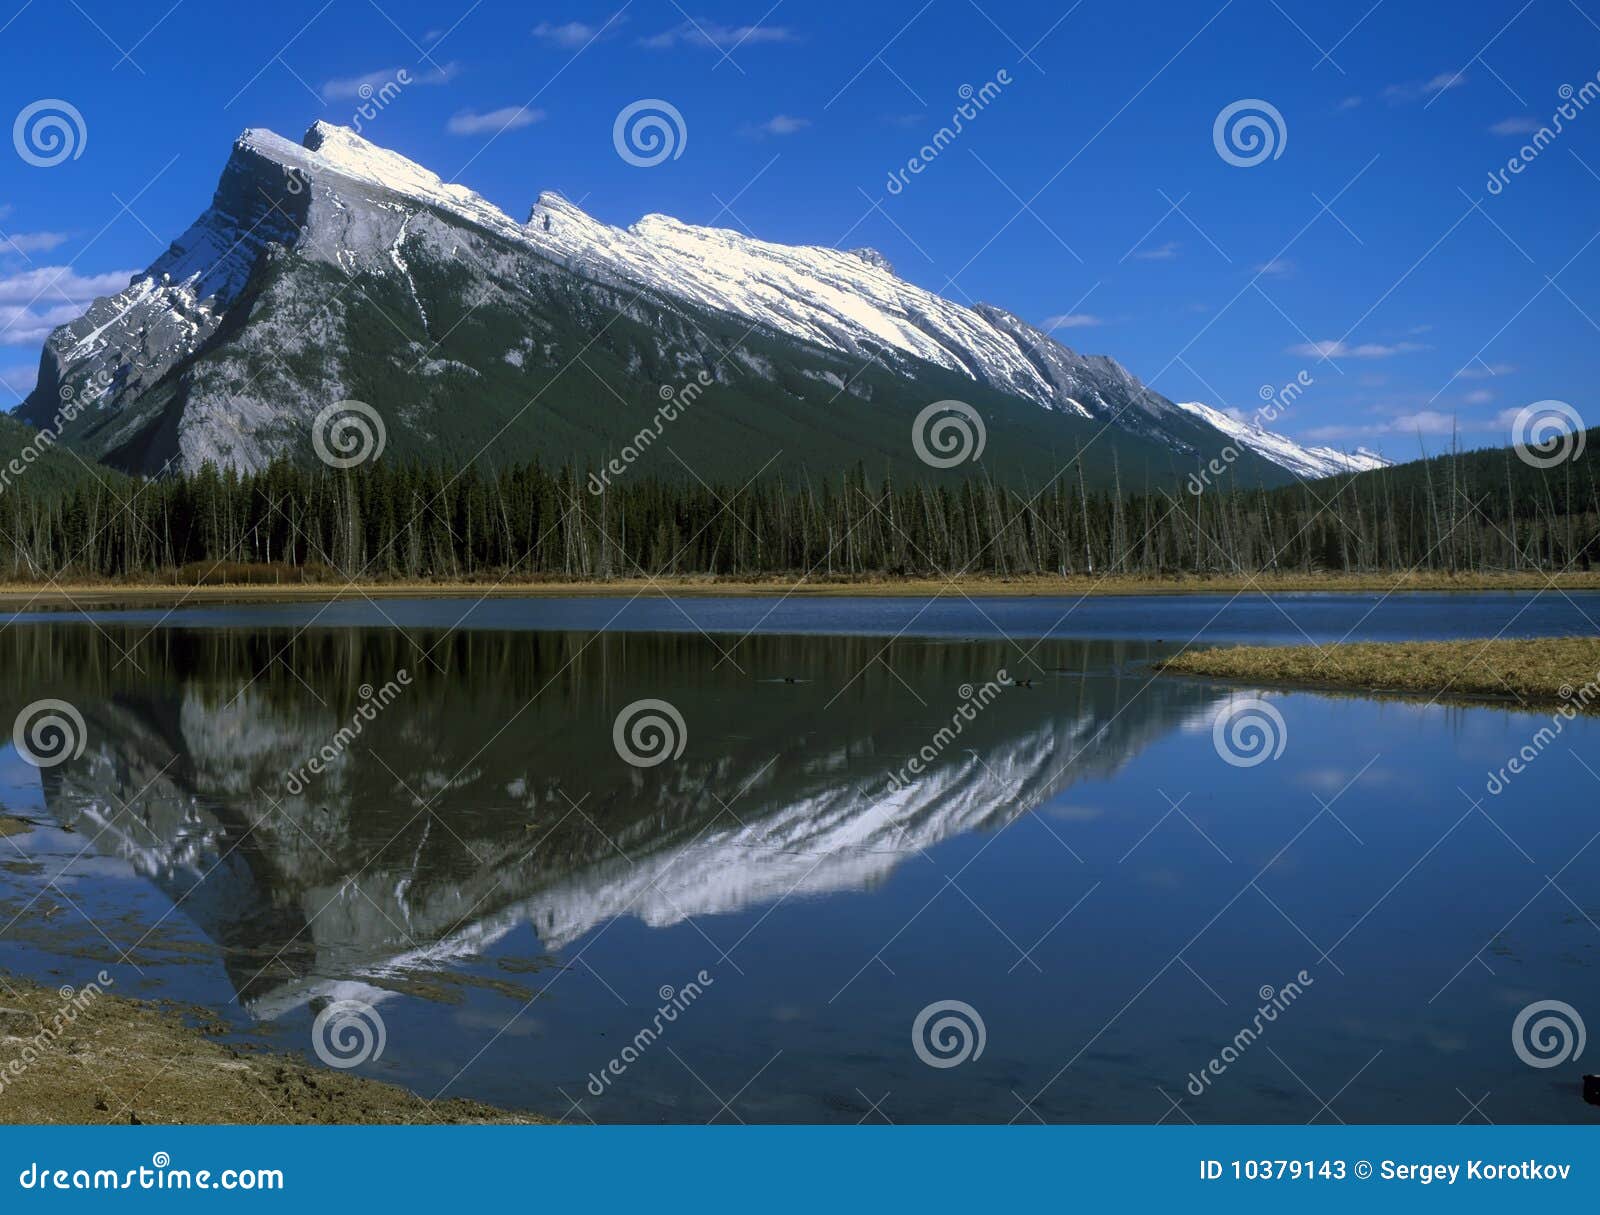 rockies mountains canada